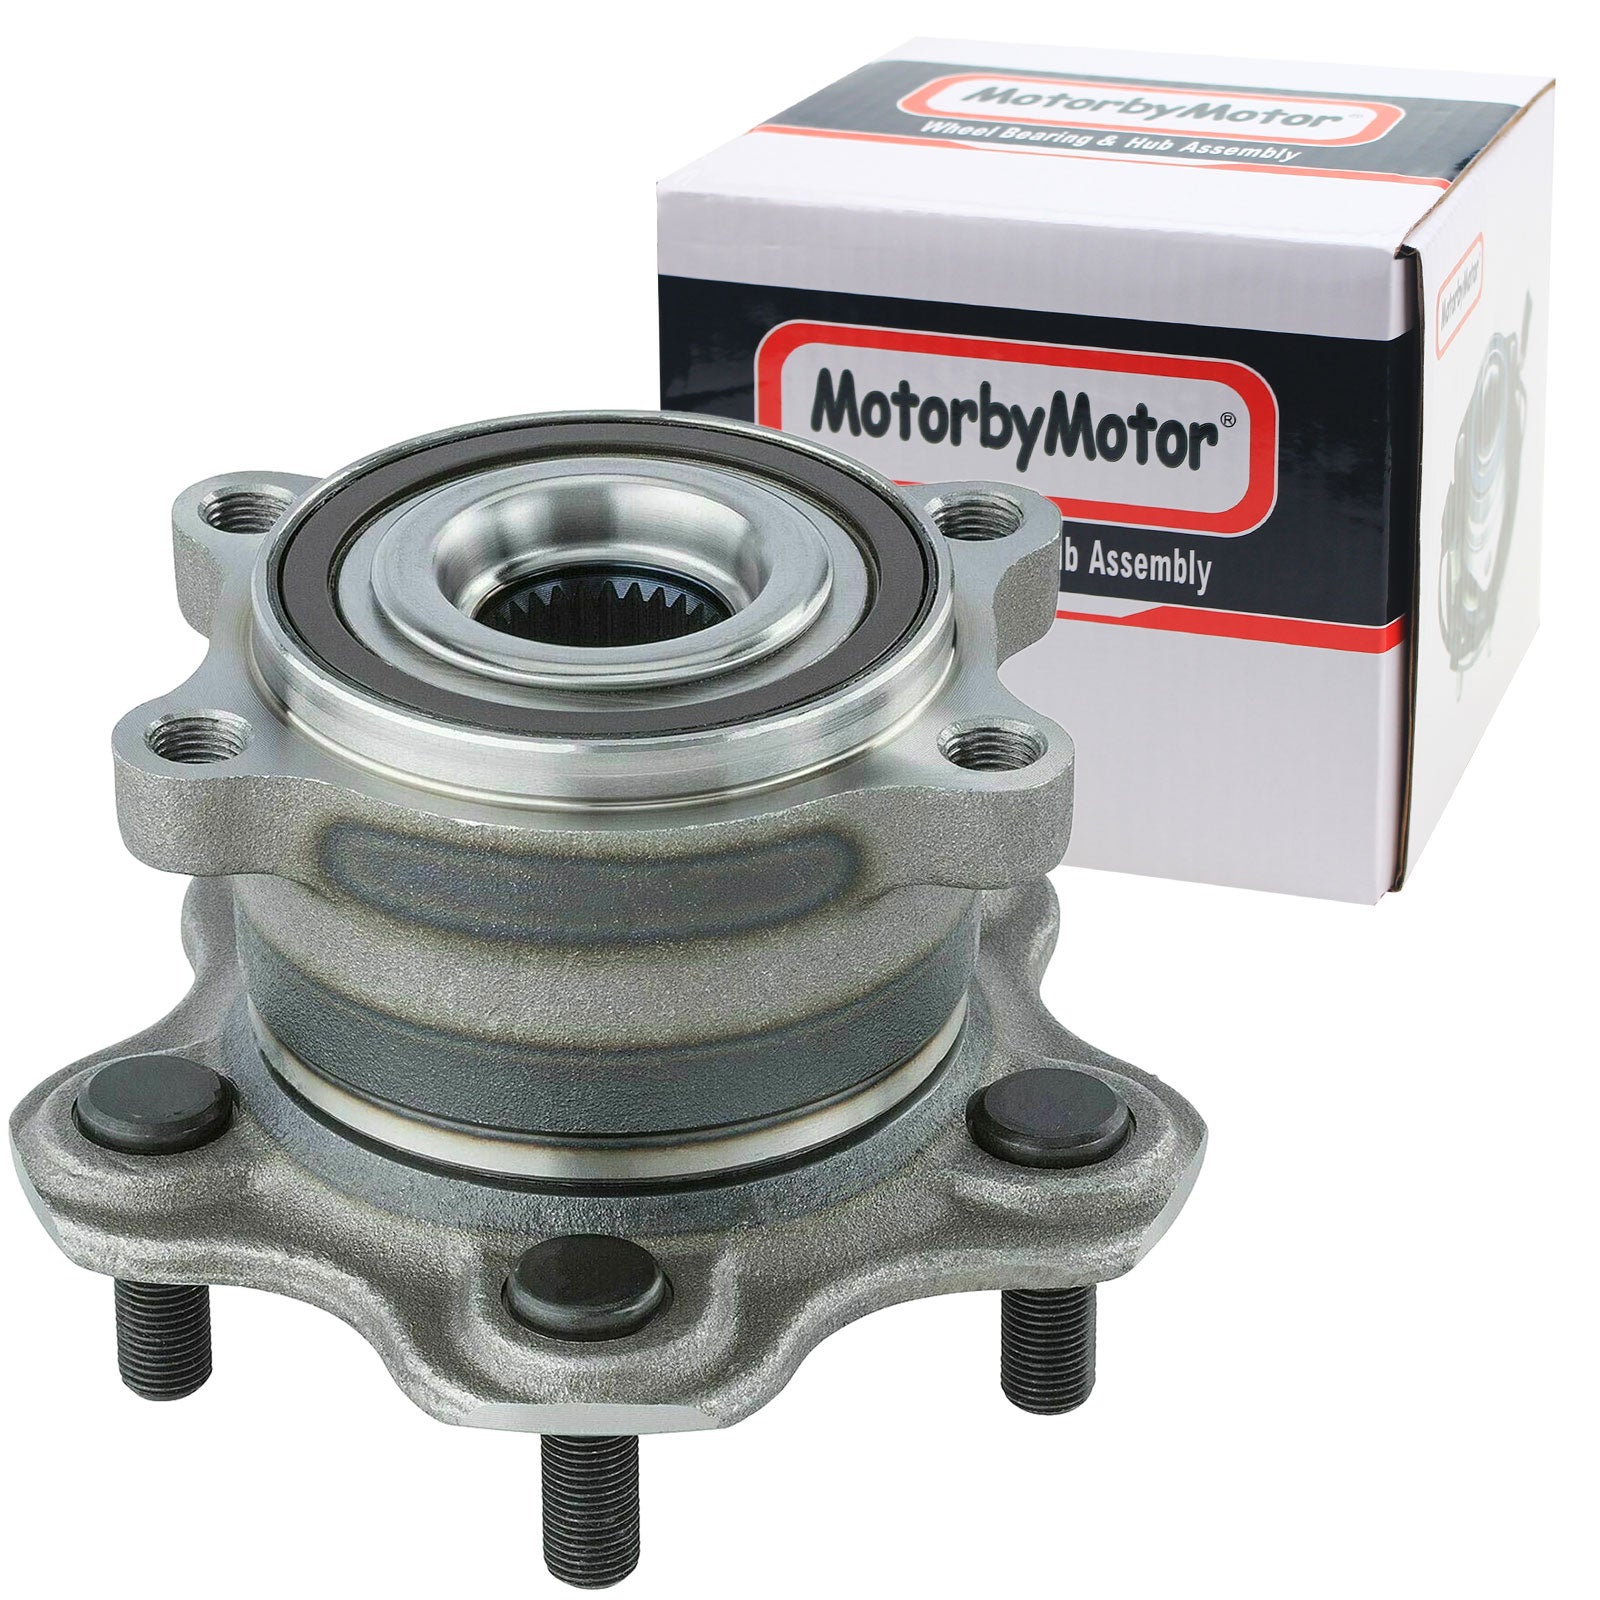 MotorbyMotor 512548 Rear Wheel Bearing and Hub Assembly with 5 Lugs fits for Infiniti JX35 QX60,Nissan Murano Pathfinder Low-Runout OE Directly Replacement Hub Bearing AWD MotorbyMotor